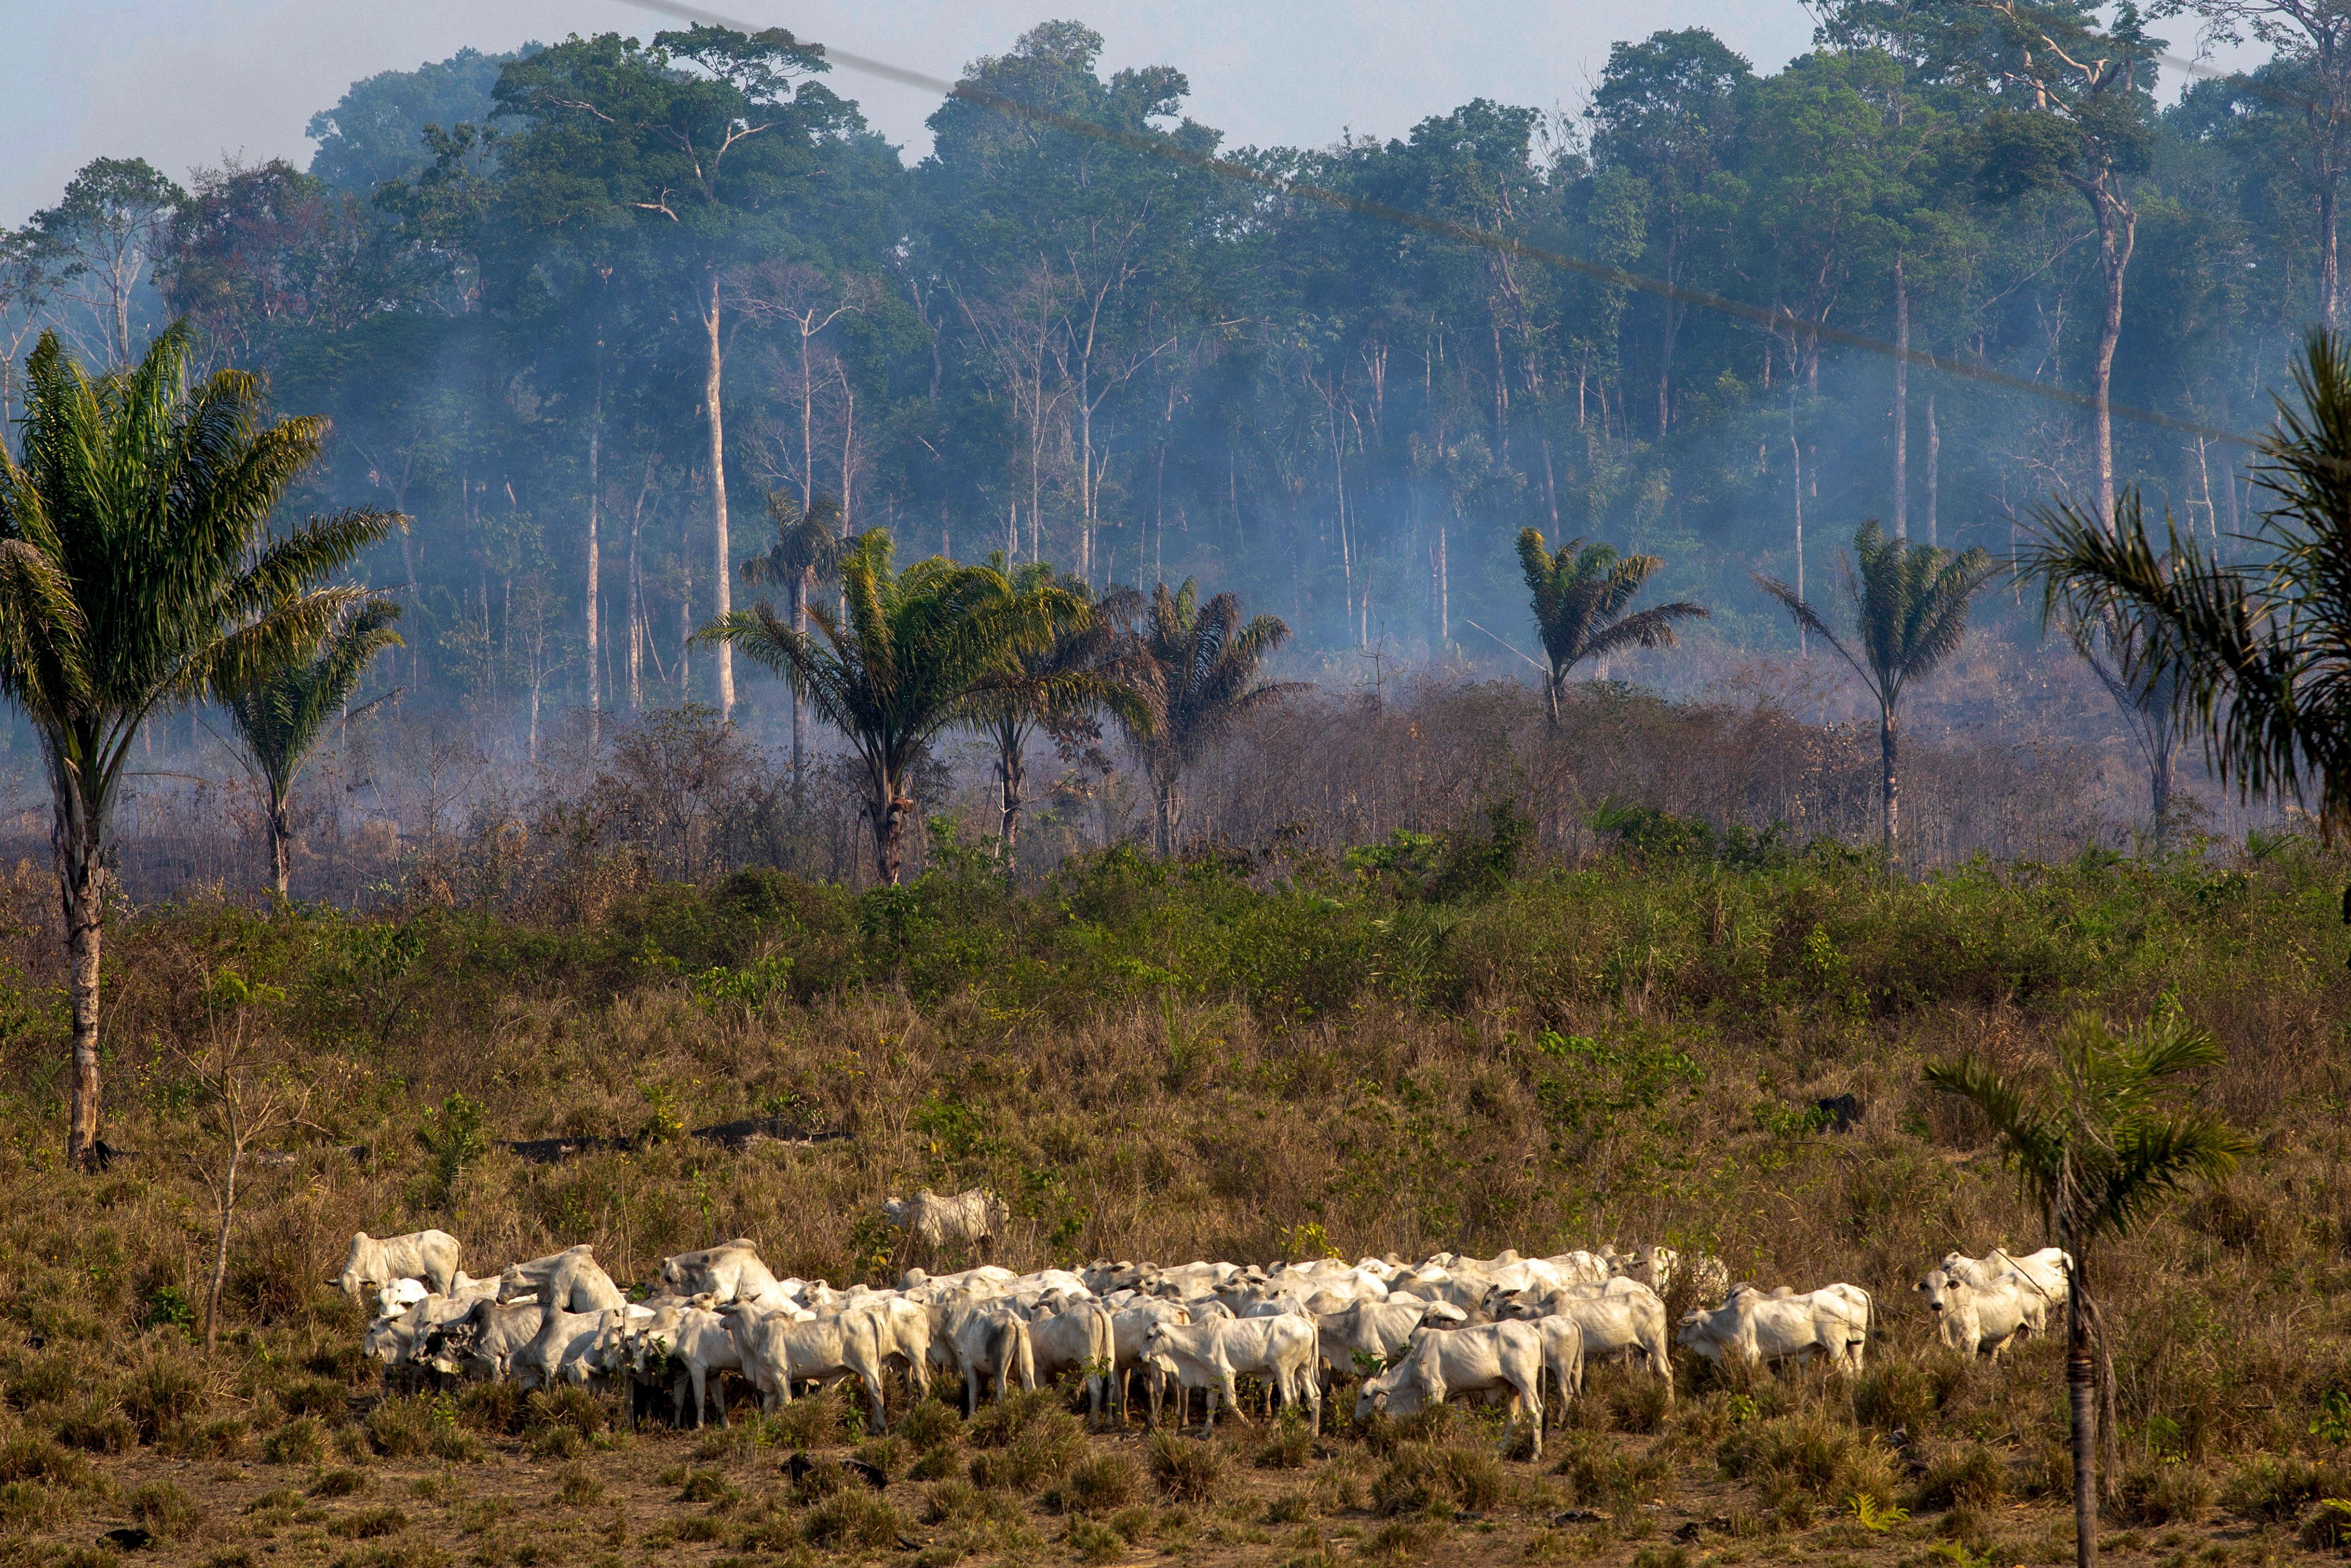 Cattle graze with a burnt area in the background after a fire in the Amazon rainforest near Novo Progresso, Para state, Brazil